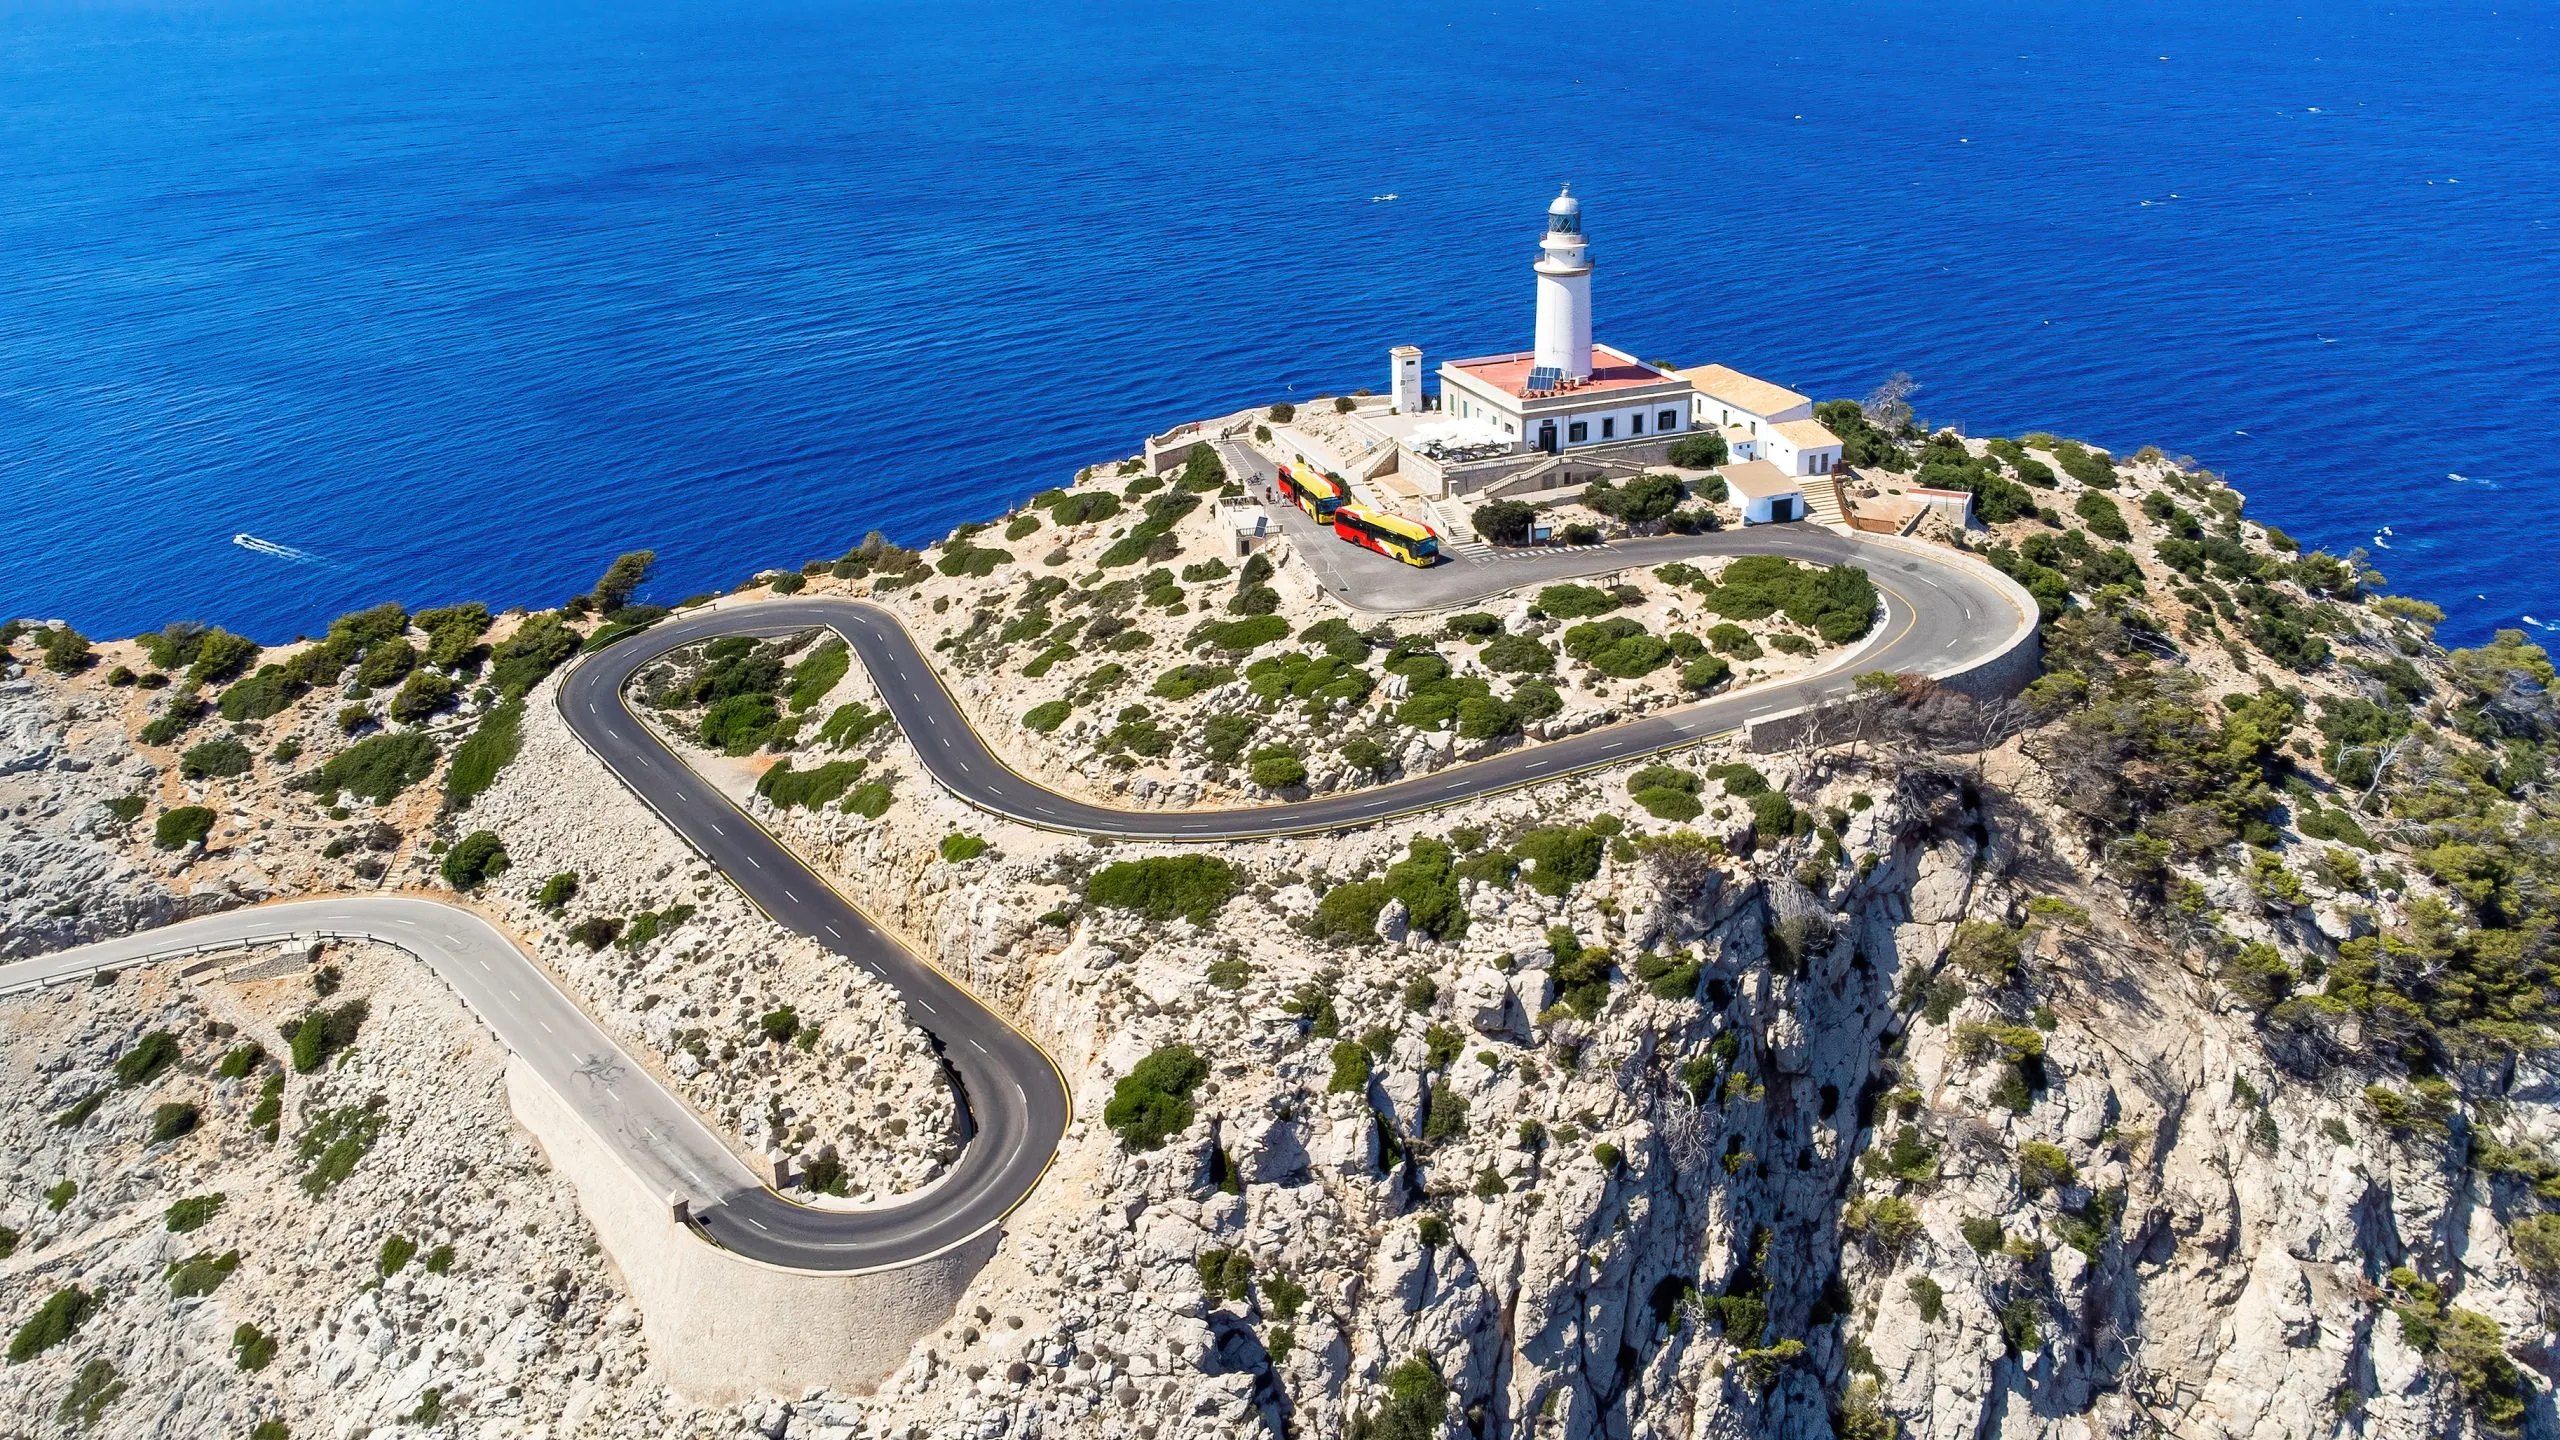 Aerial view of the lighthouse of Cape Formentor and of the hairpin road leading to it on the northeastern coast of Majorca in the Balearic Islands, Mediterranean Sea, Spain